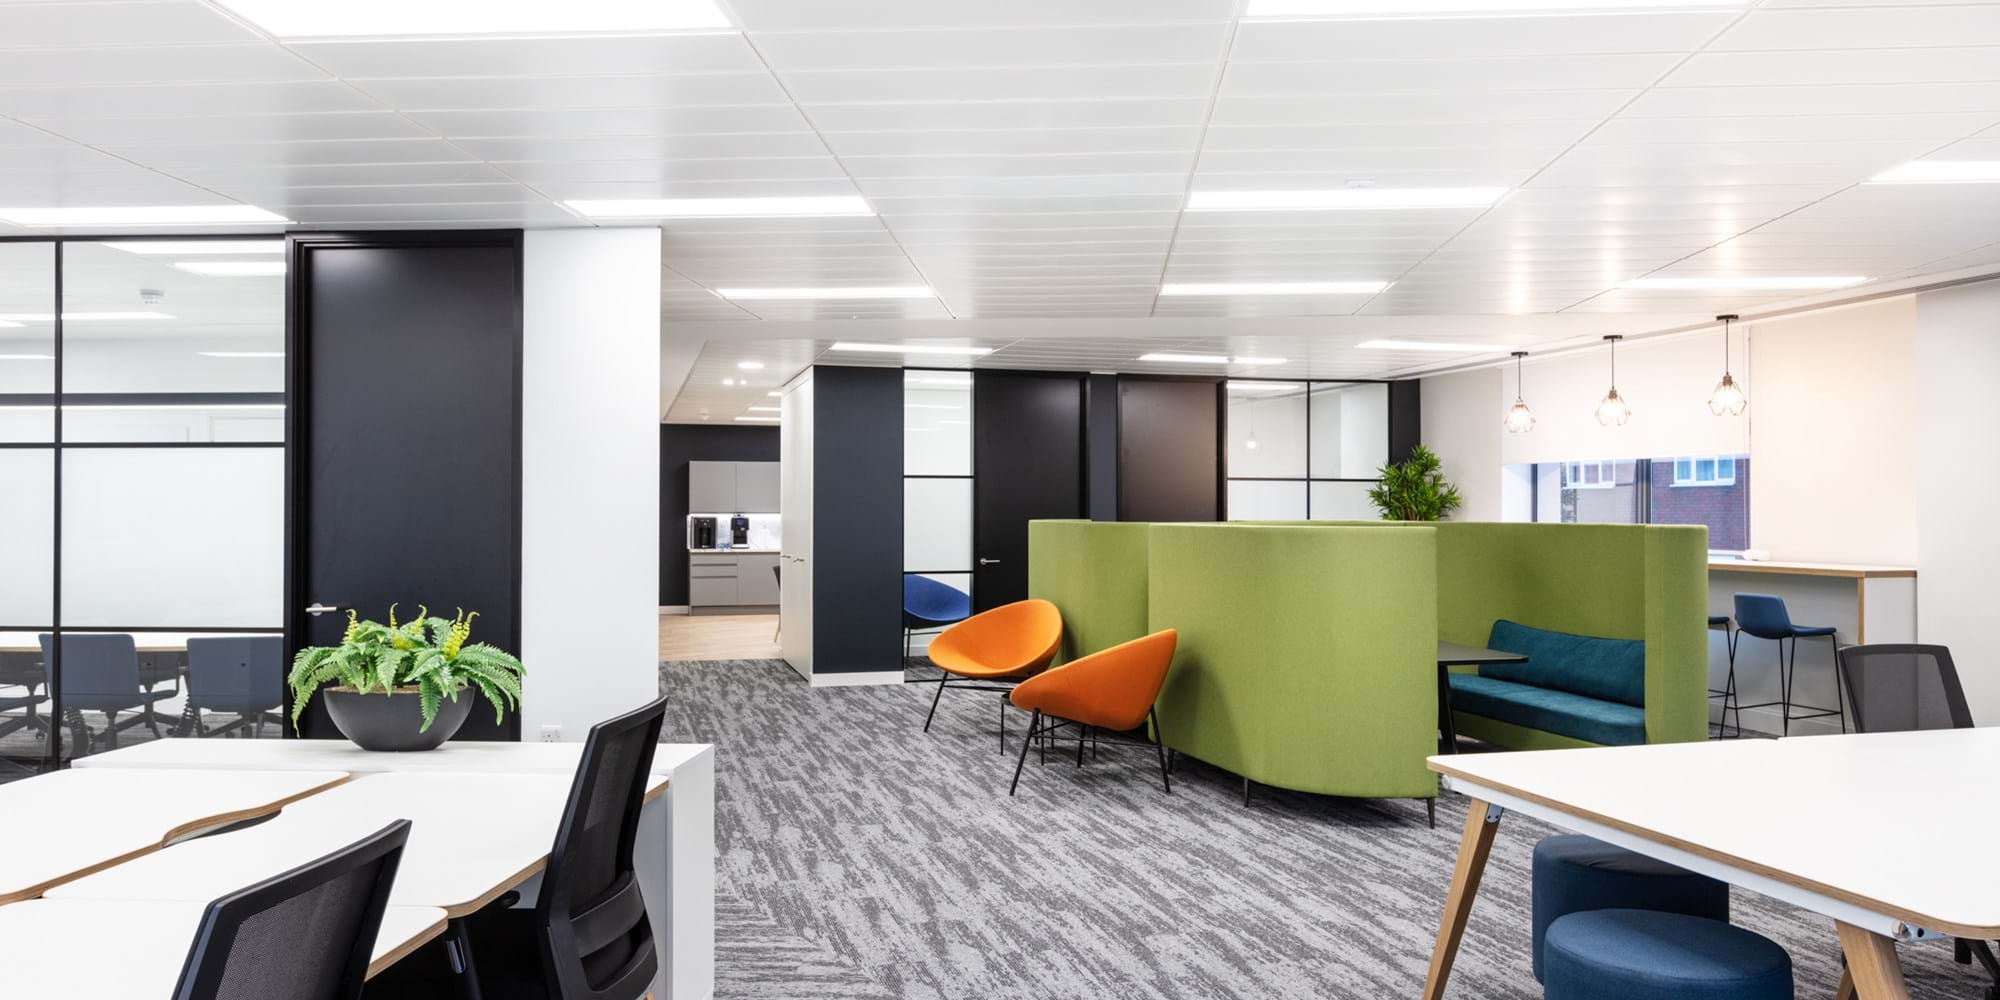 Modus Workspace office design, fit out and refurbishment - Pivot - Guildford - Pivot_Guildford_161220-31.jpg